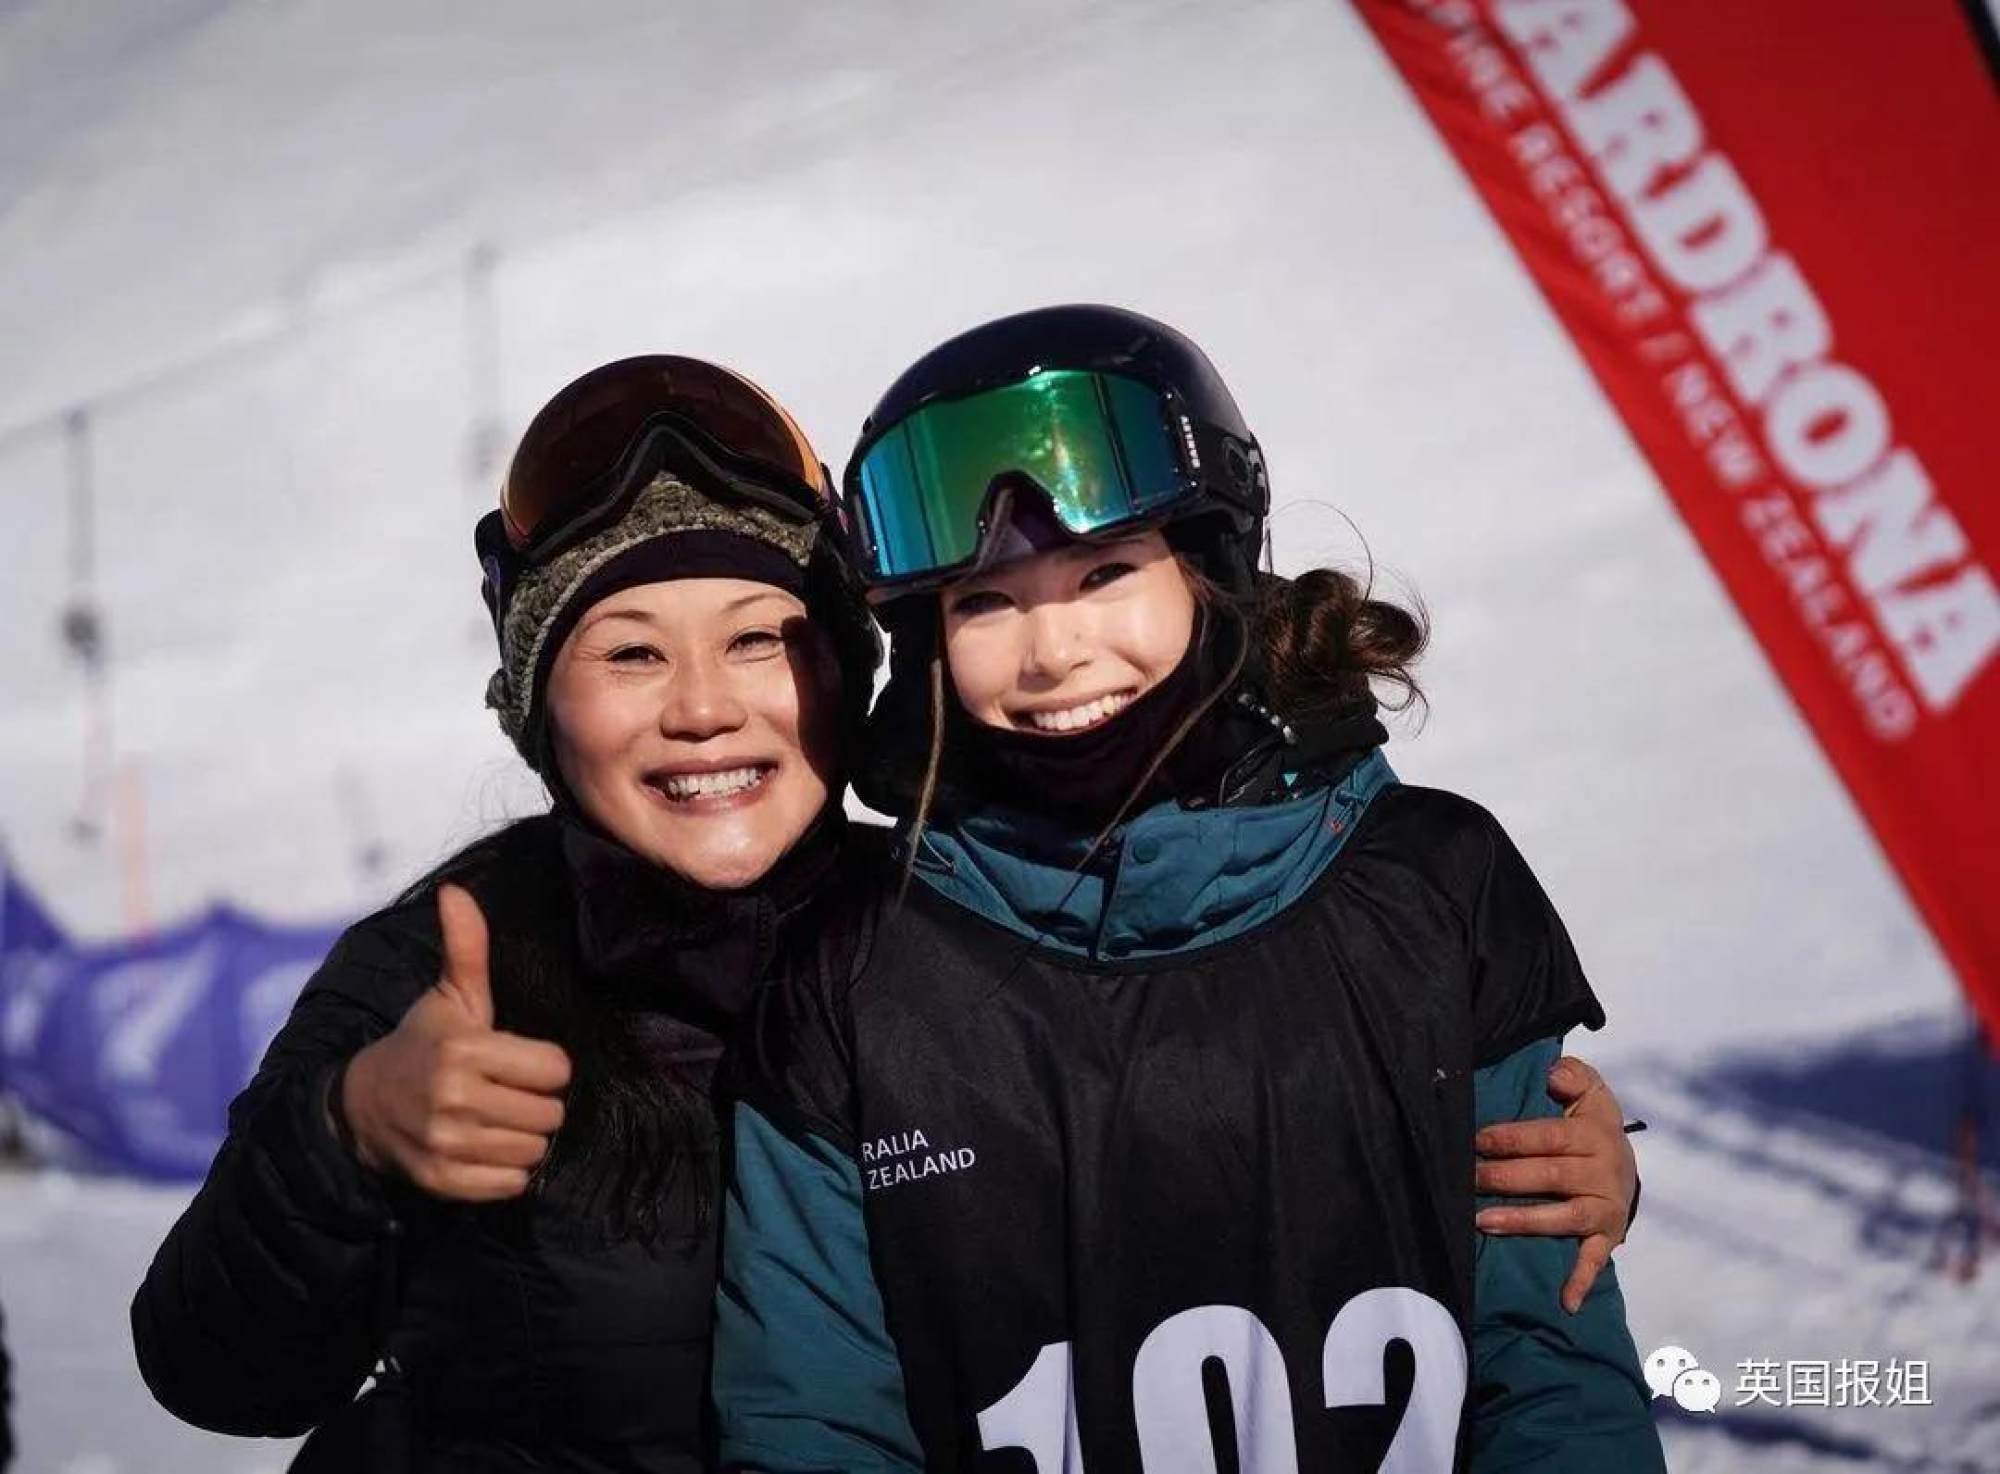 Winter Olympics: Chinese freestyle ski star Eileen Gu's parents gives advice to parents hoping to raise a champion | The Star